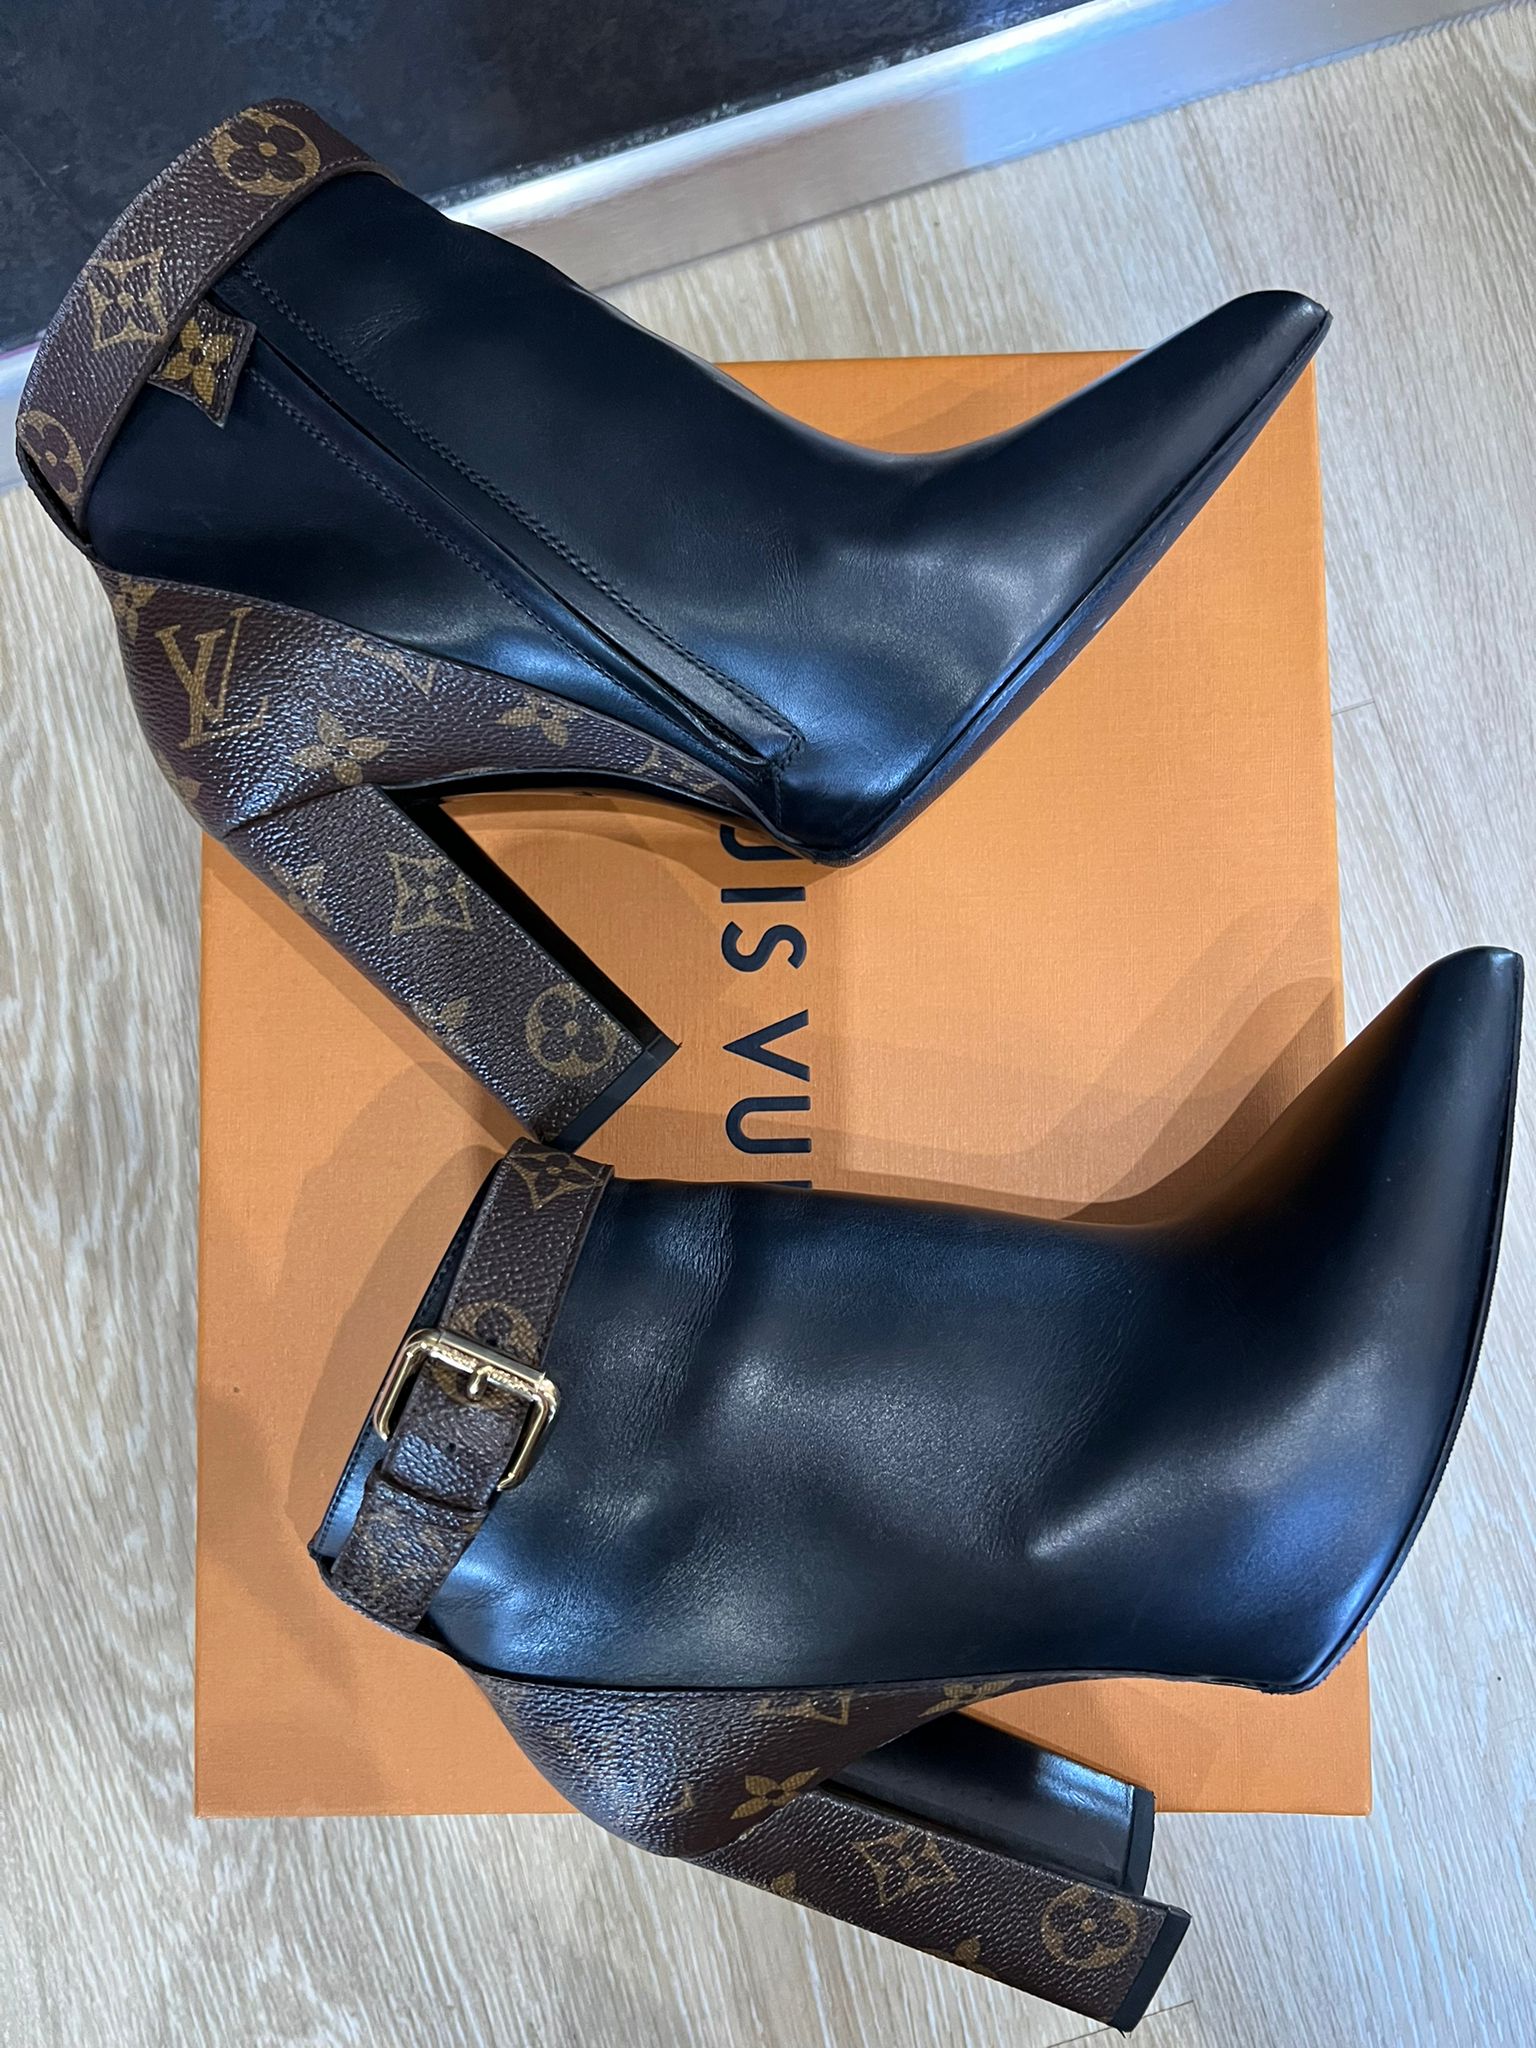 Louis Vuitton Matchmake Ankle Boots